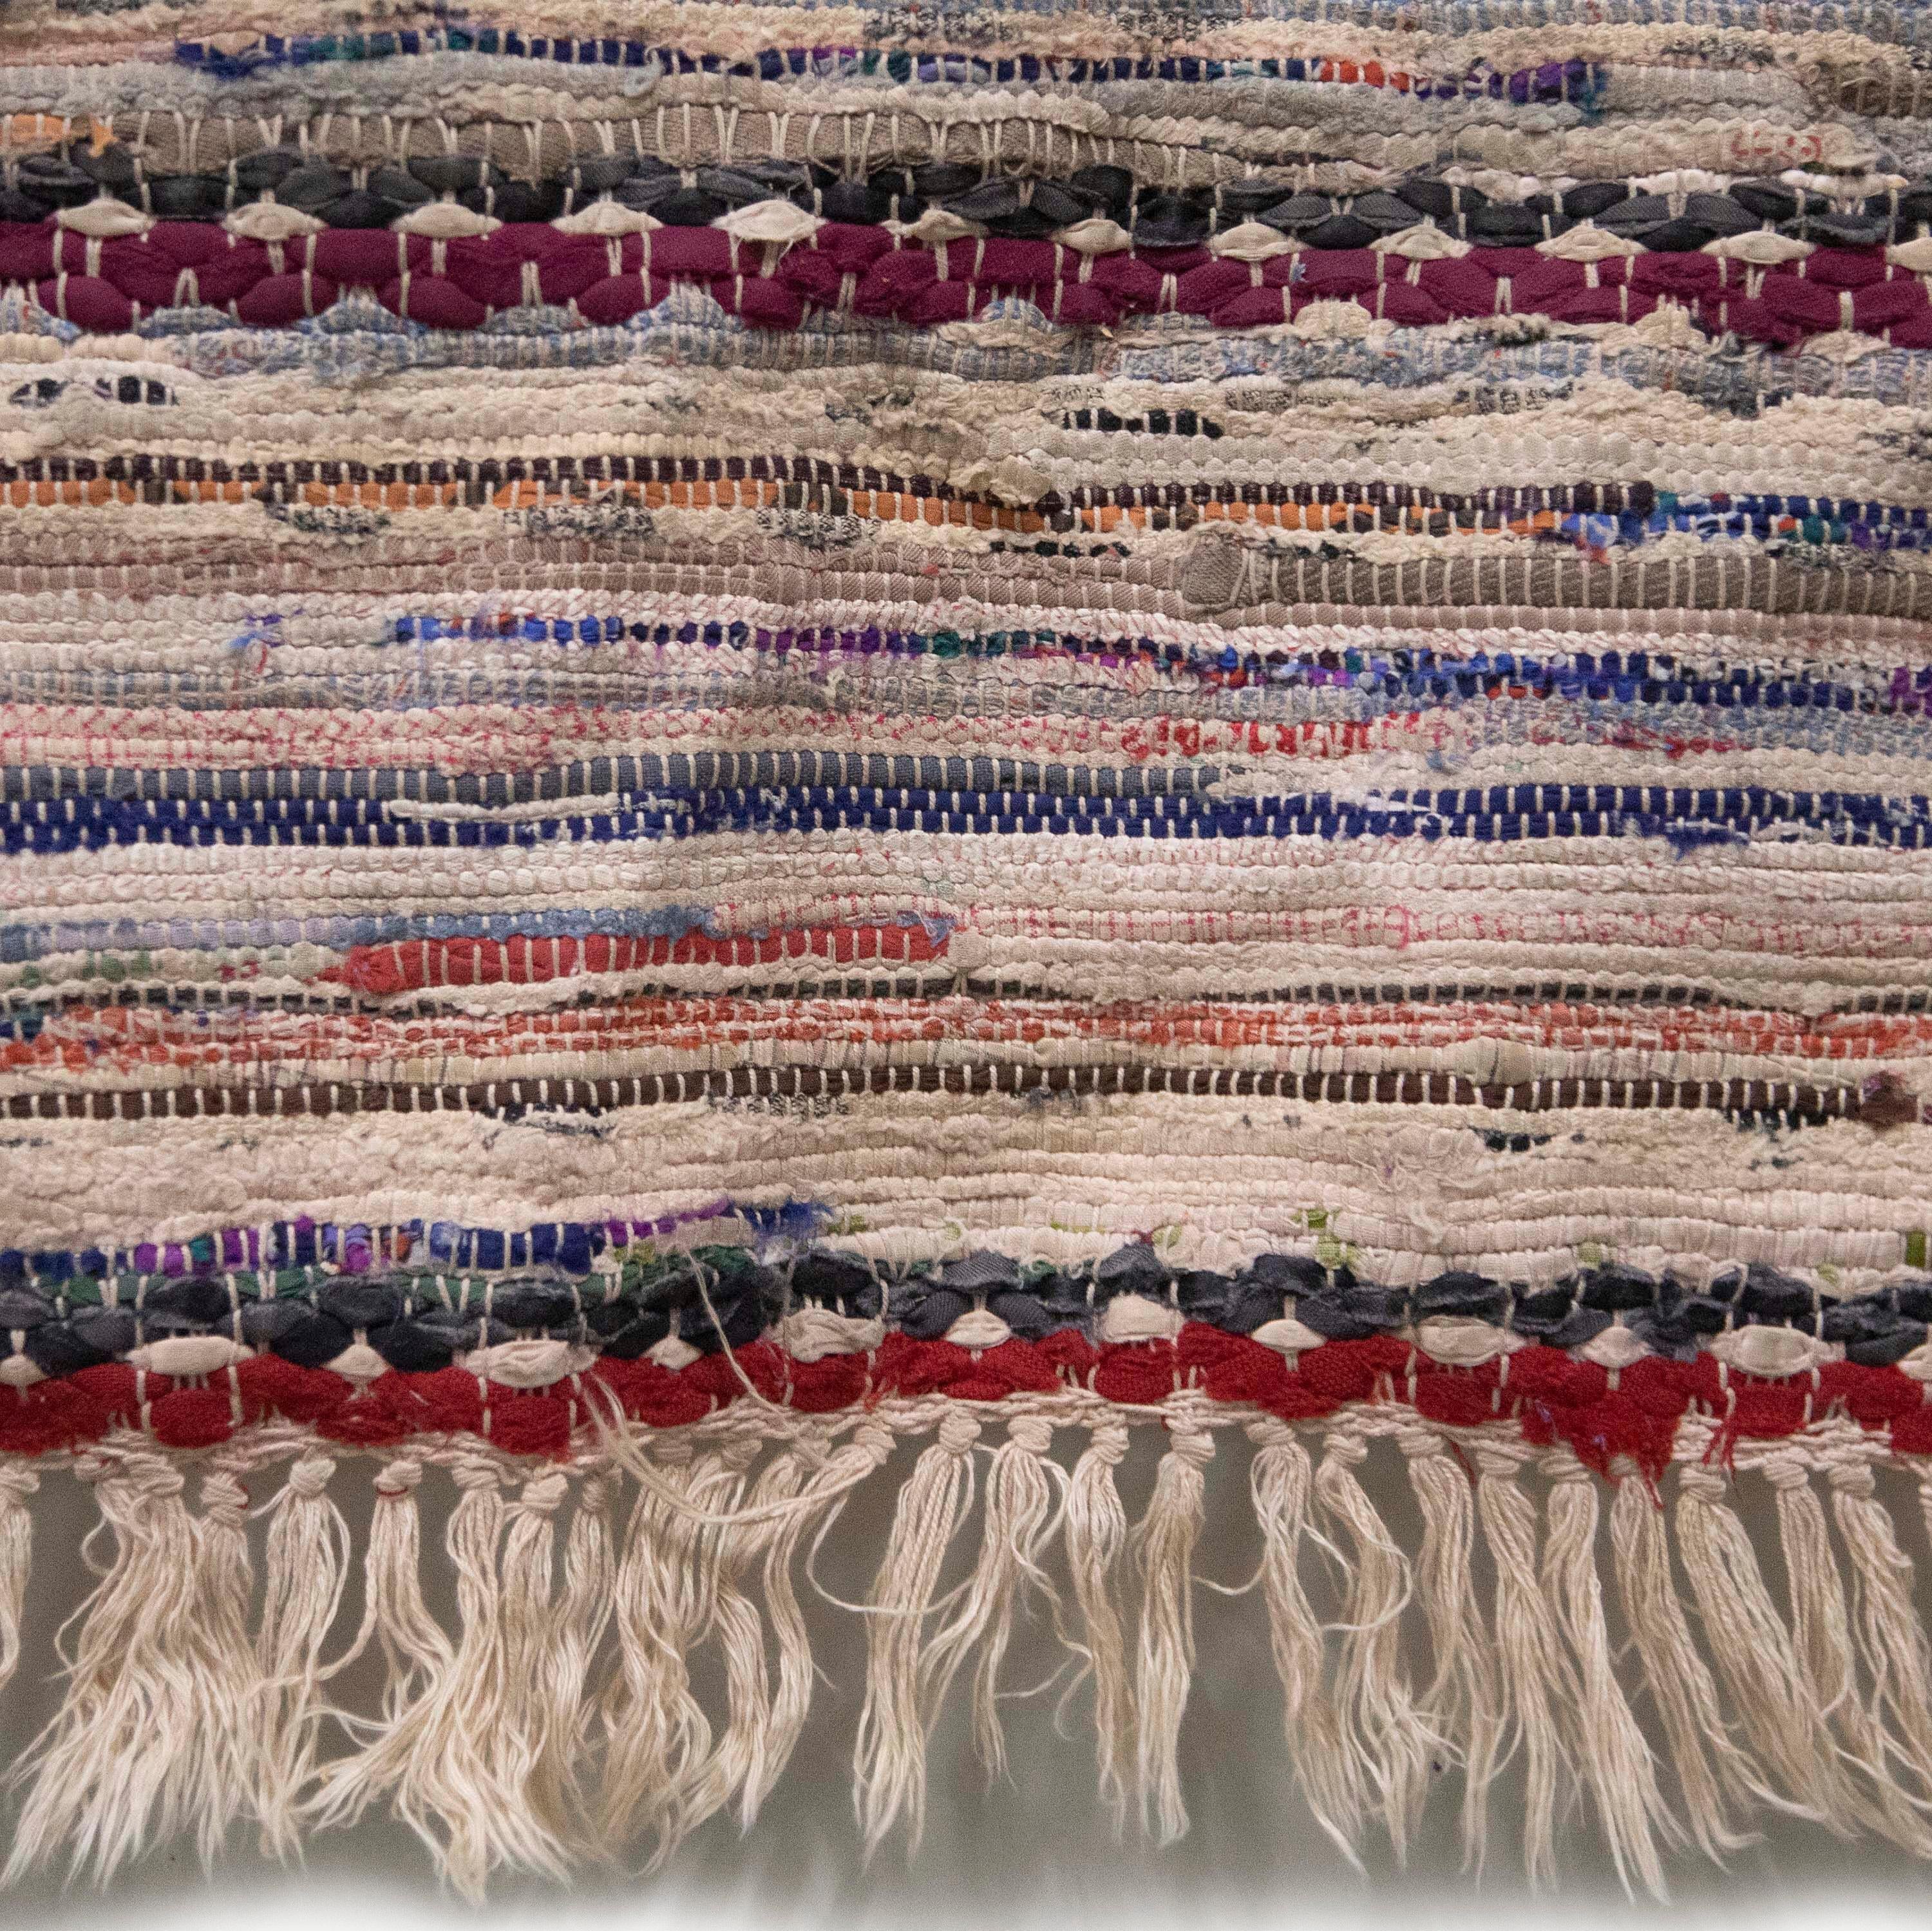 20th century Swedish rag rug. Featuring a stripe design throughout in tones of pink, red and blue. This rug can be machine-washed at 30 degrees.
RT6024585